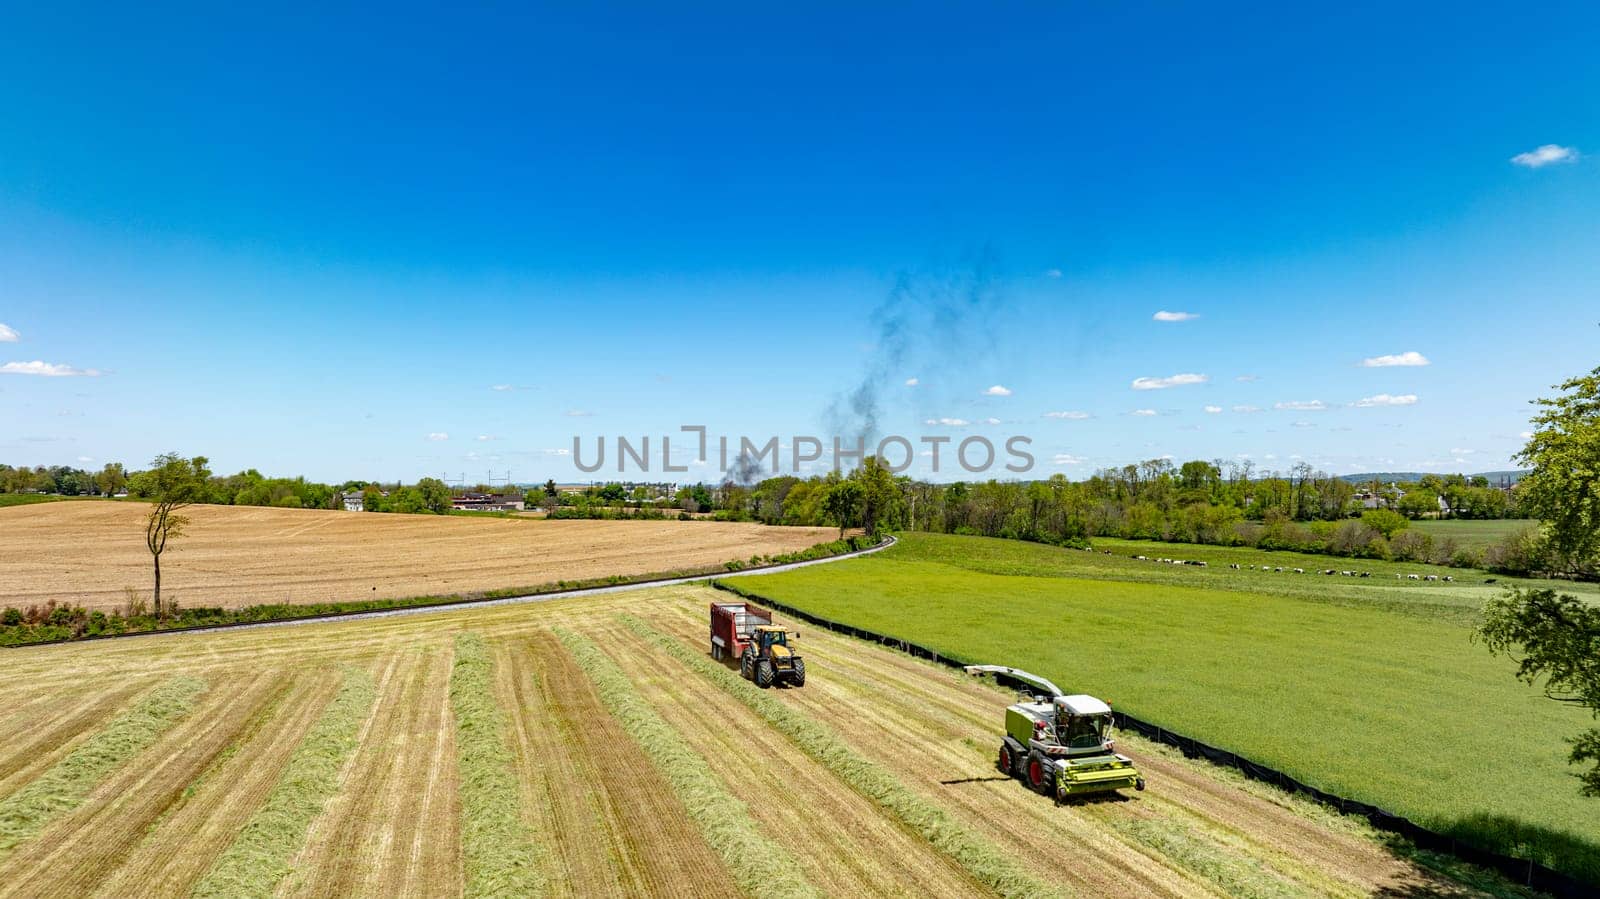 An aerial shot displaying intense harvesting activity with machinery in action across a multi-textured landscape of cut and uncut fields, under a bright blue sky with distant smoke visible.